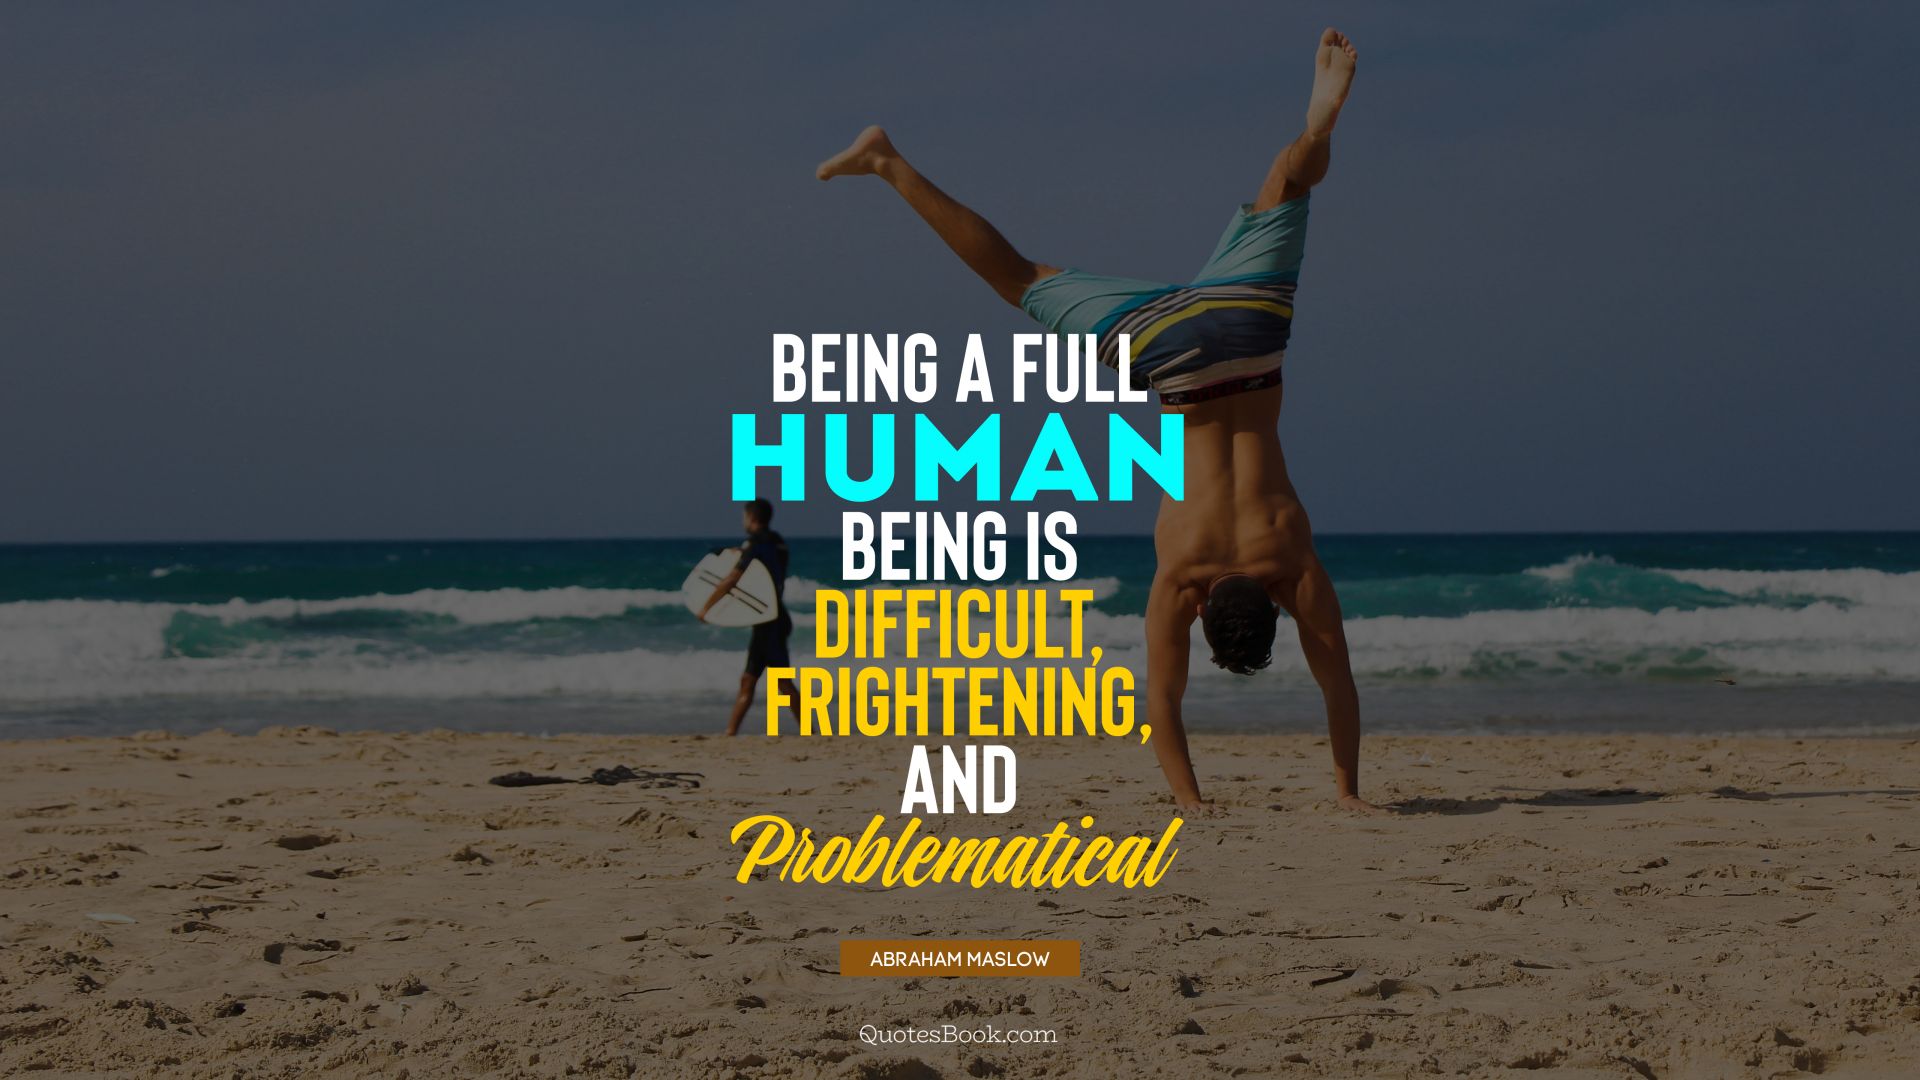 Being a full human being is difficult, frightening, and problematical. - Quote by Abraham Maslow